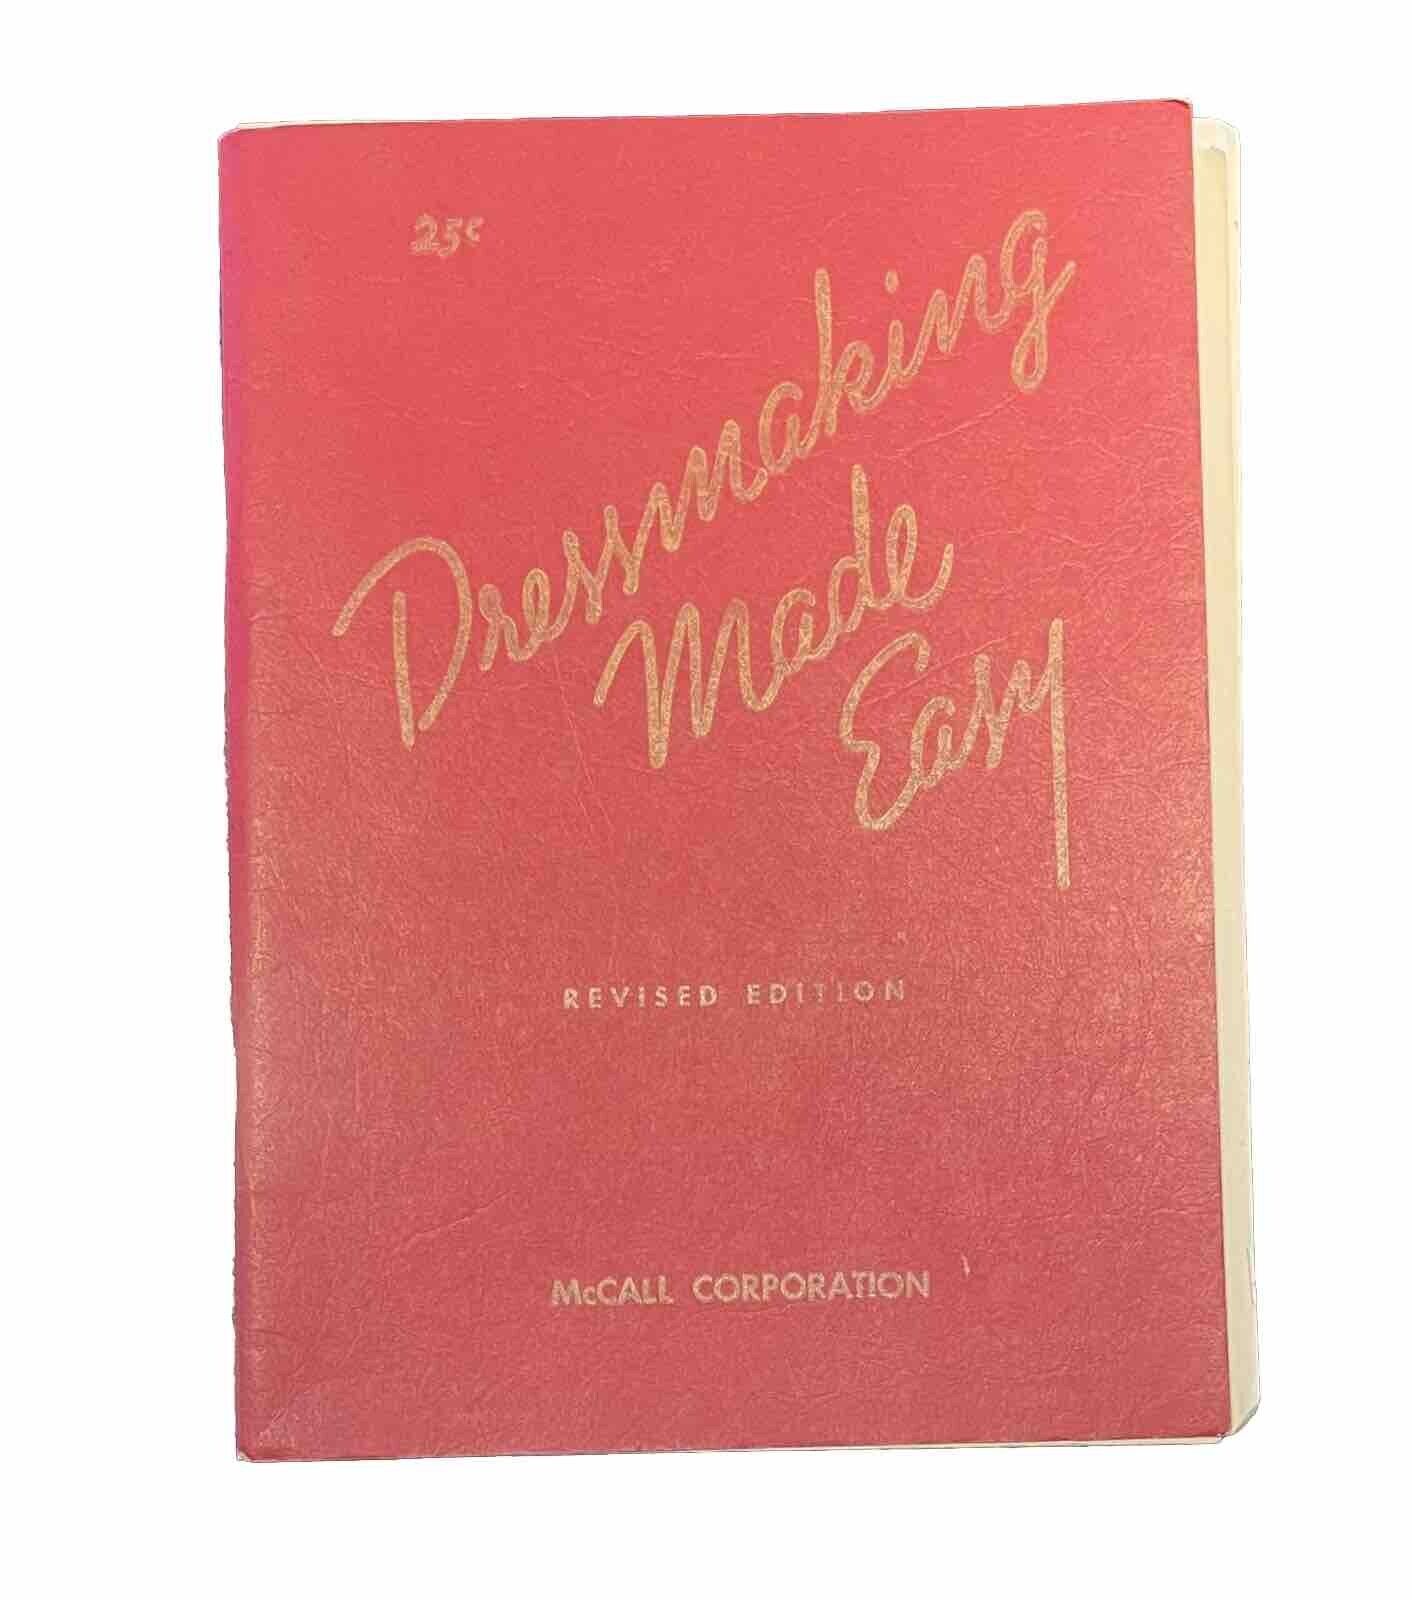 1946 McCall Dressmaking Made Easy Revised Edition